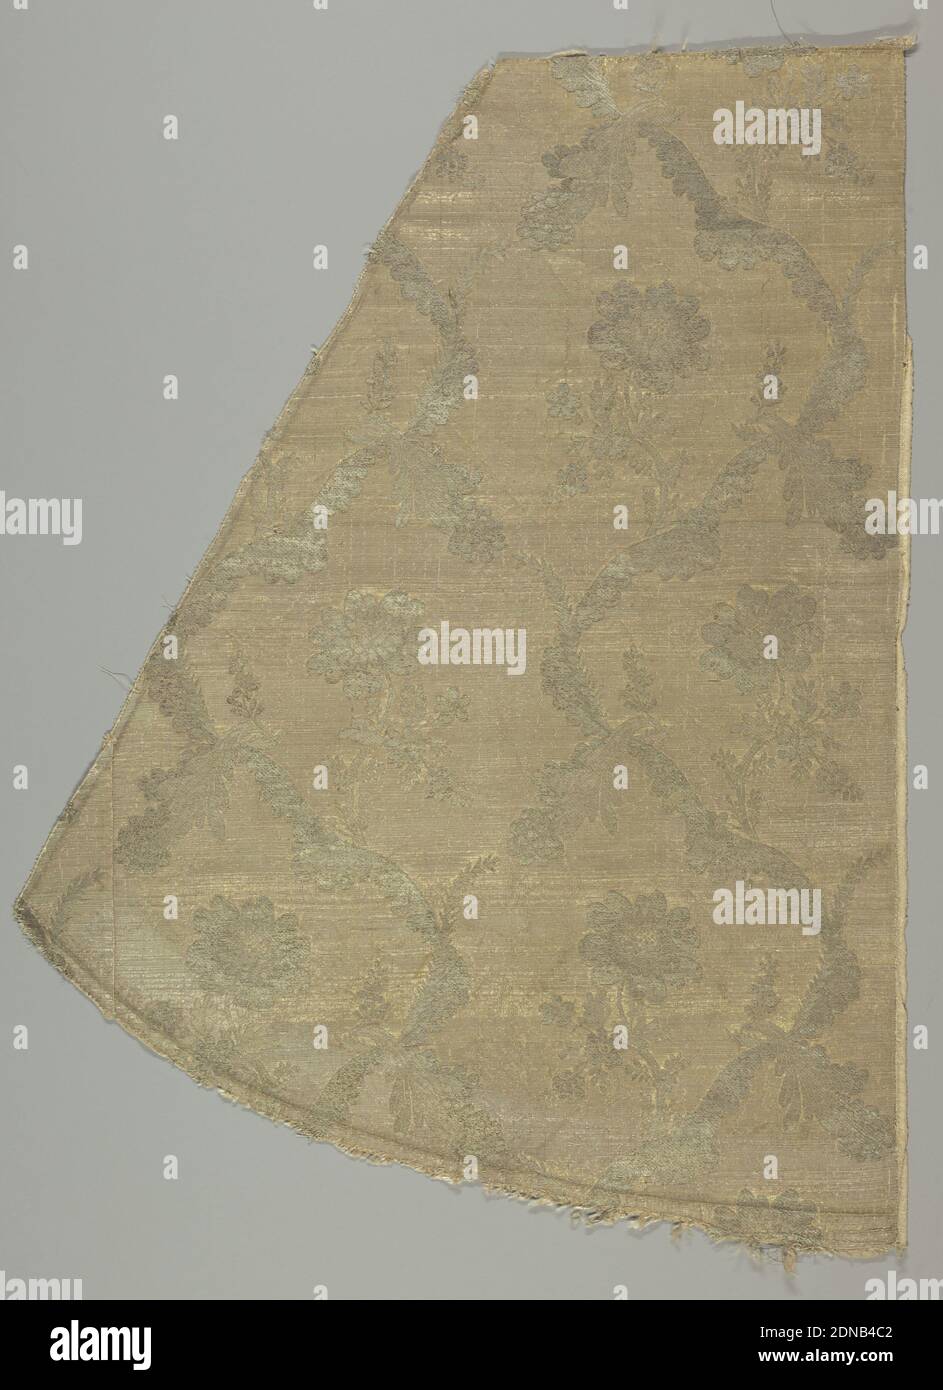 Textile, Medium: silk, metallic Technique: plain weave with discontinuous supplementary wefts (brocading), Curving festoons and flowers in pink and silver., 18th century, woven textiles, Textile Stock Photo